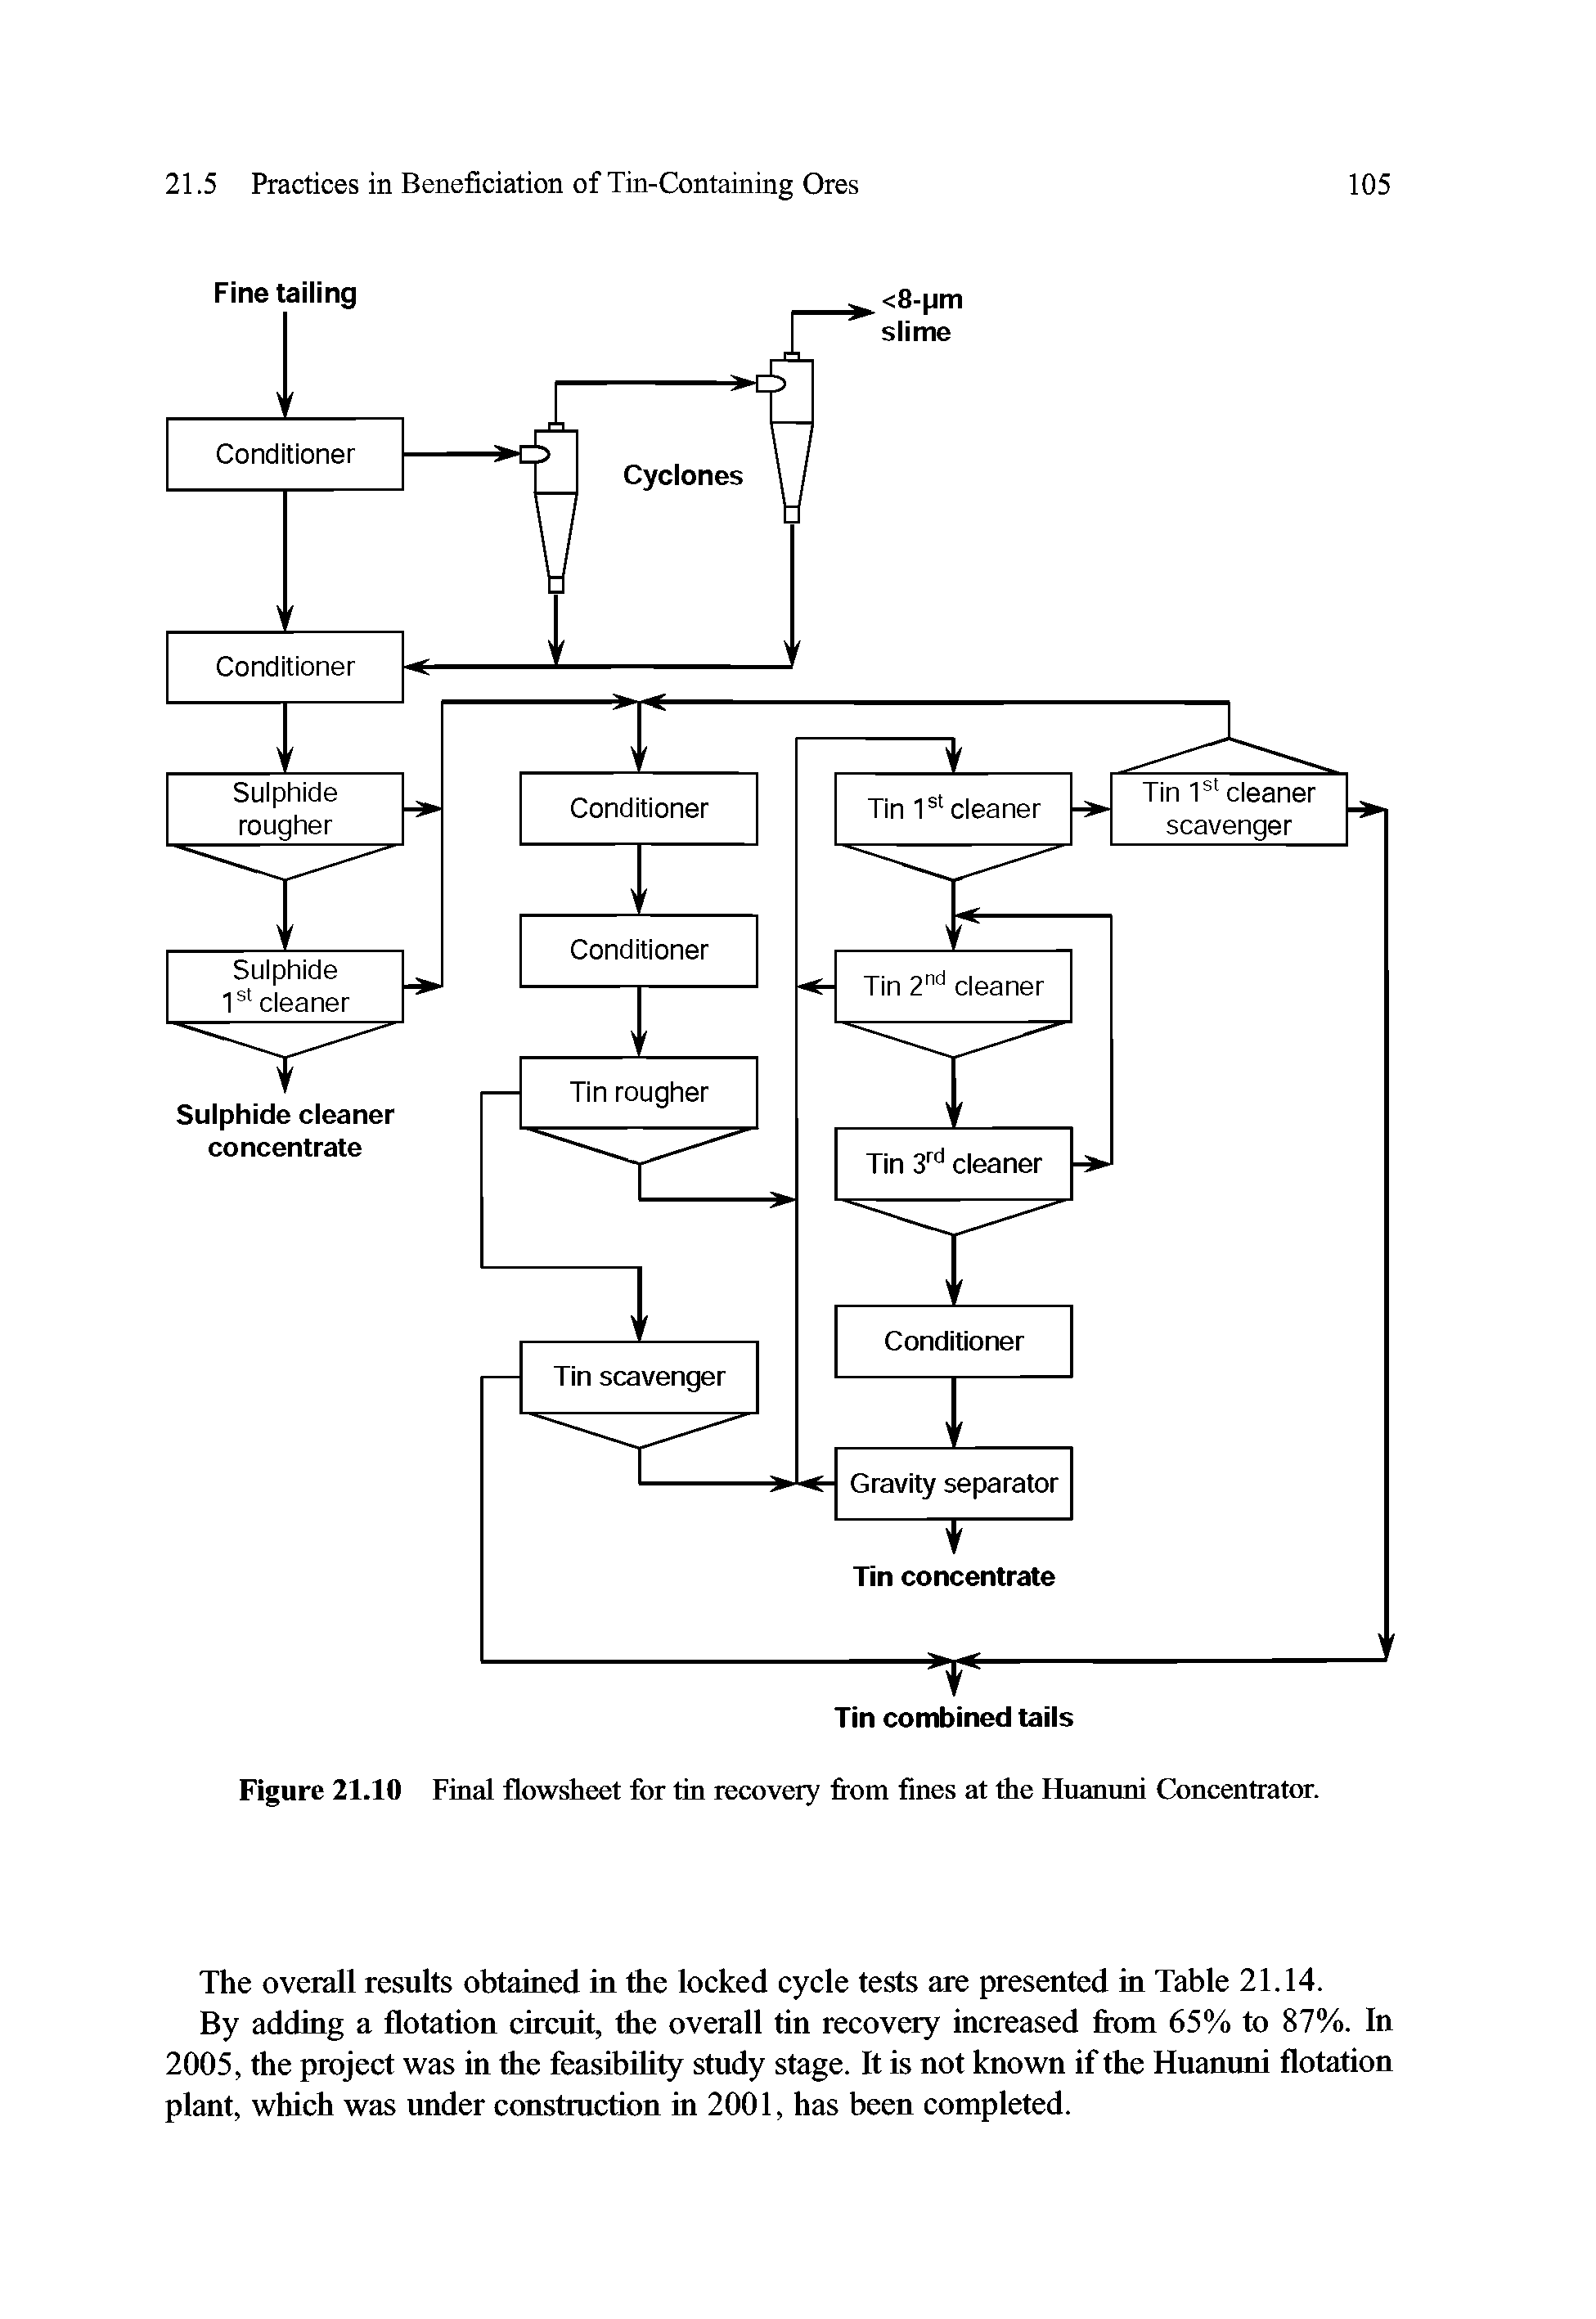 Figure 21.10 Final flowsheet for tin recovery from fines at the Huanuni Concentrator.